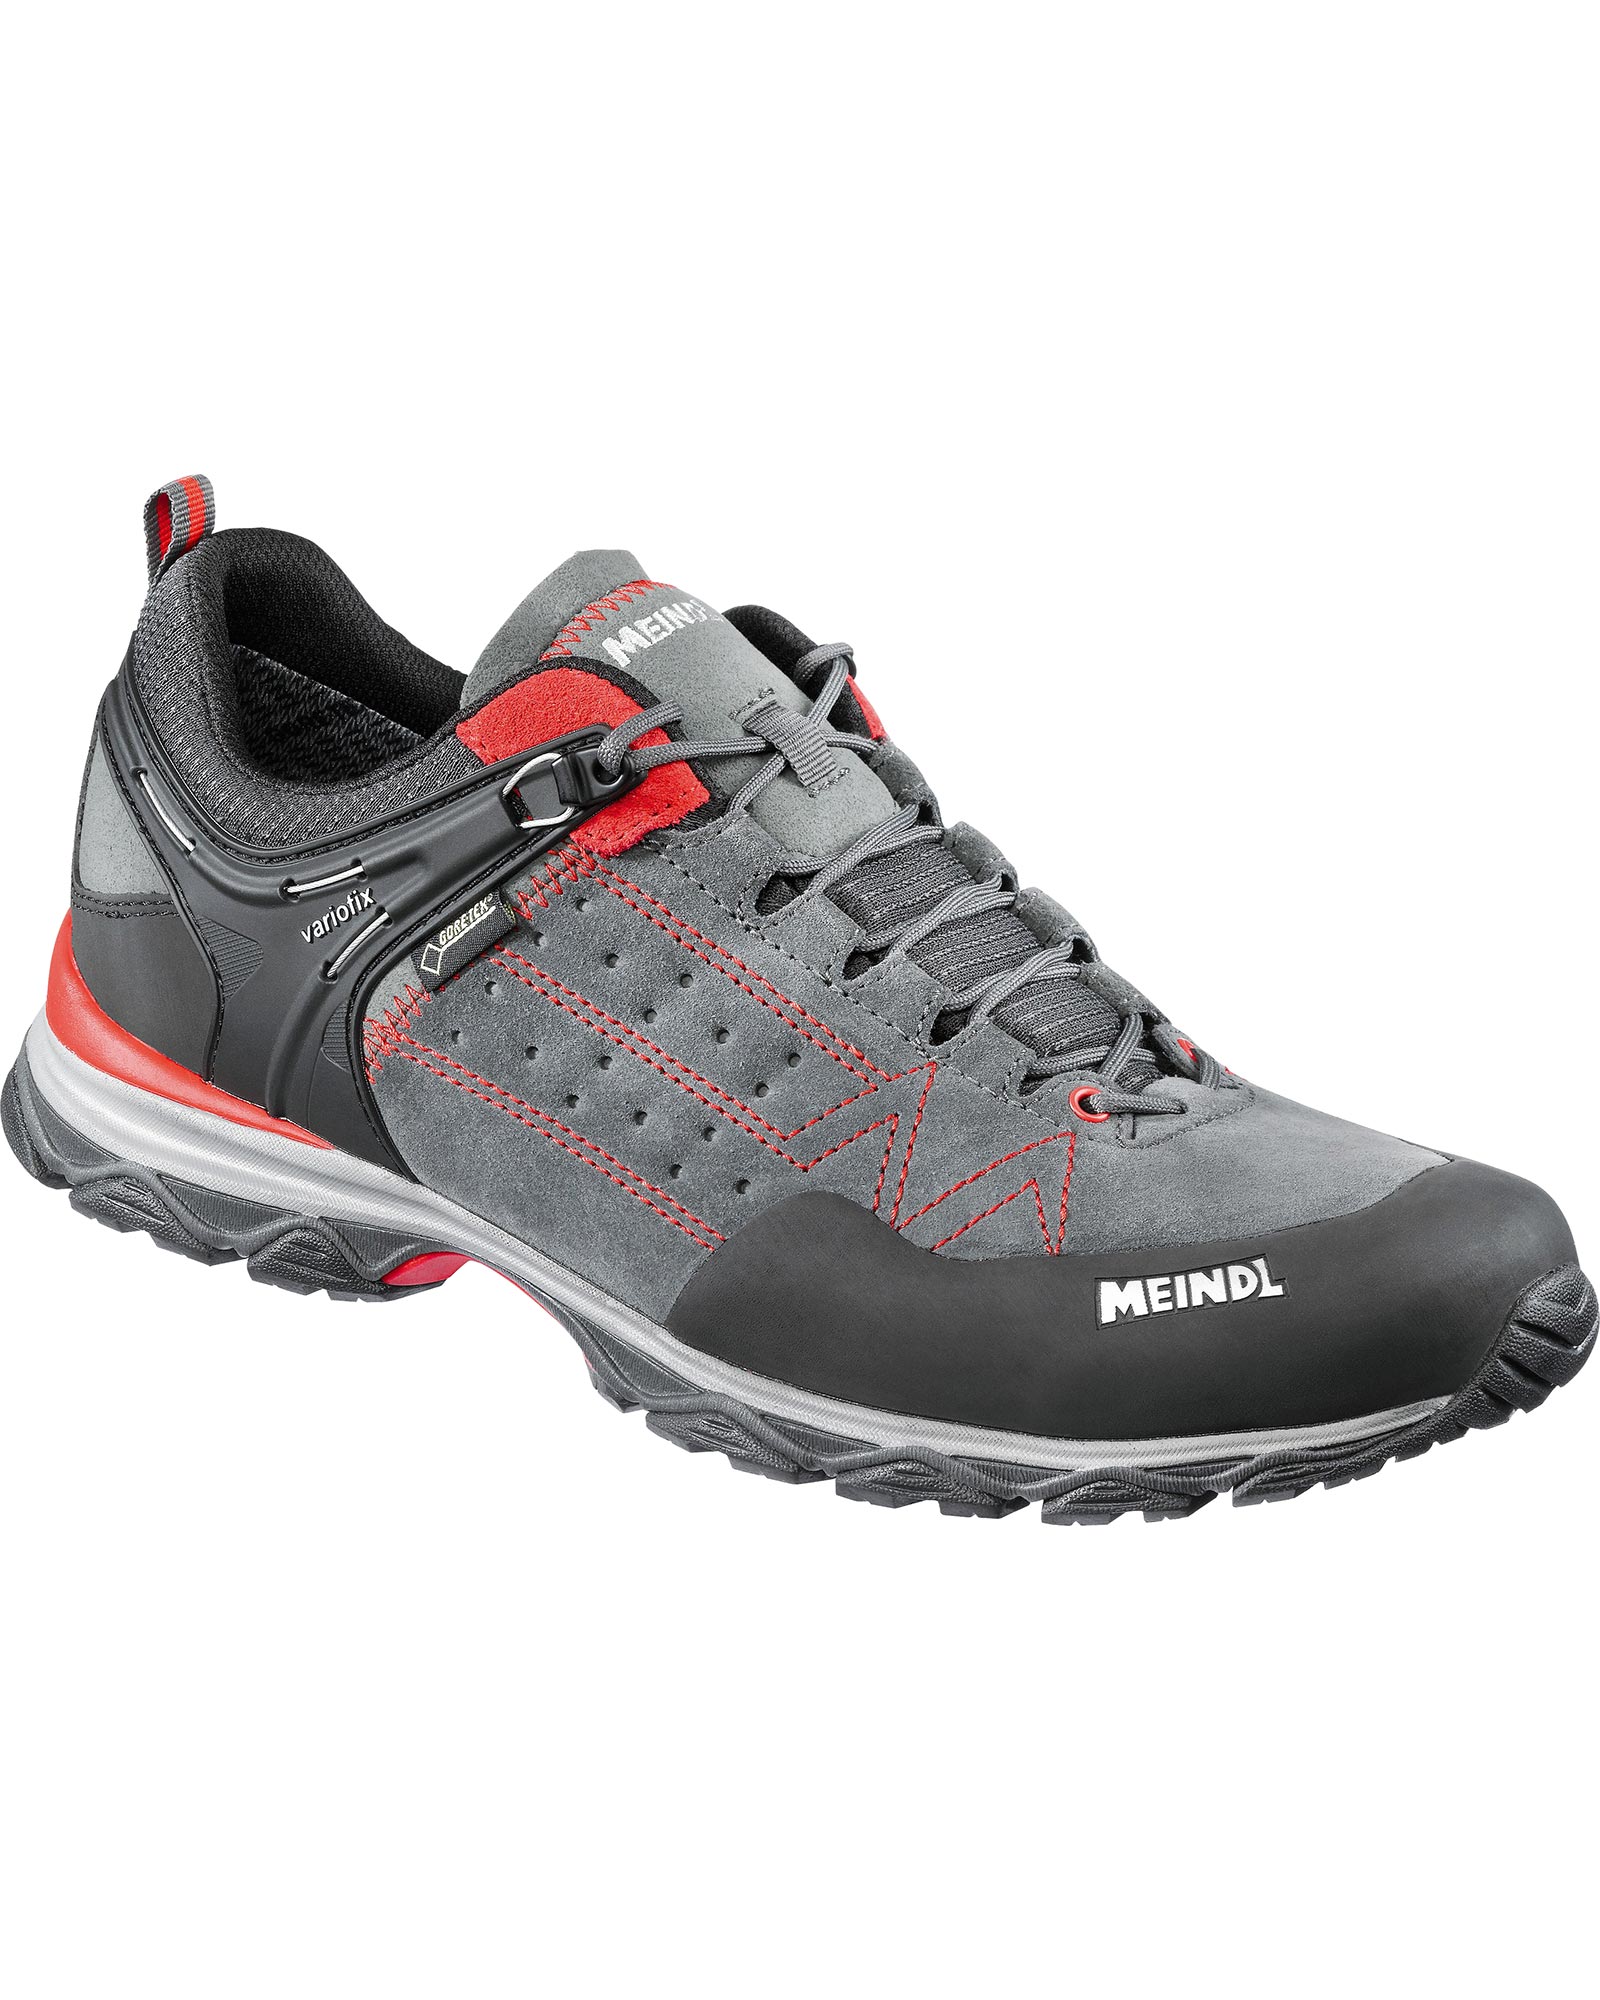 Meindl Ontario GORE TEX Men’s Shoes - Red/Anthracite UK 9